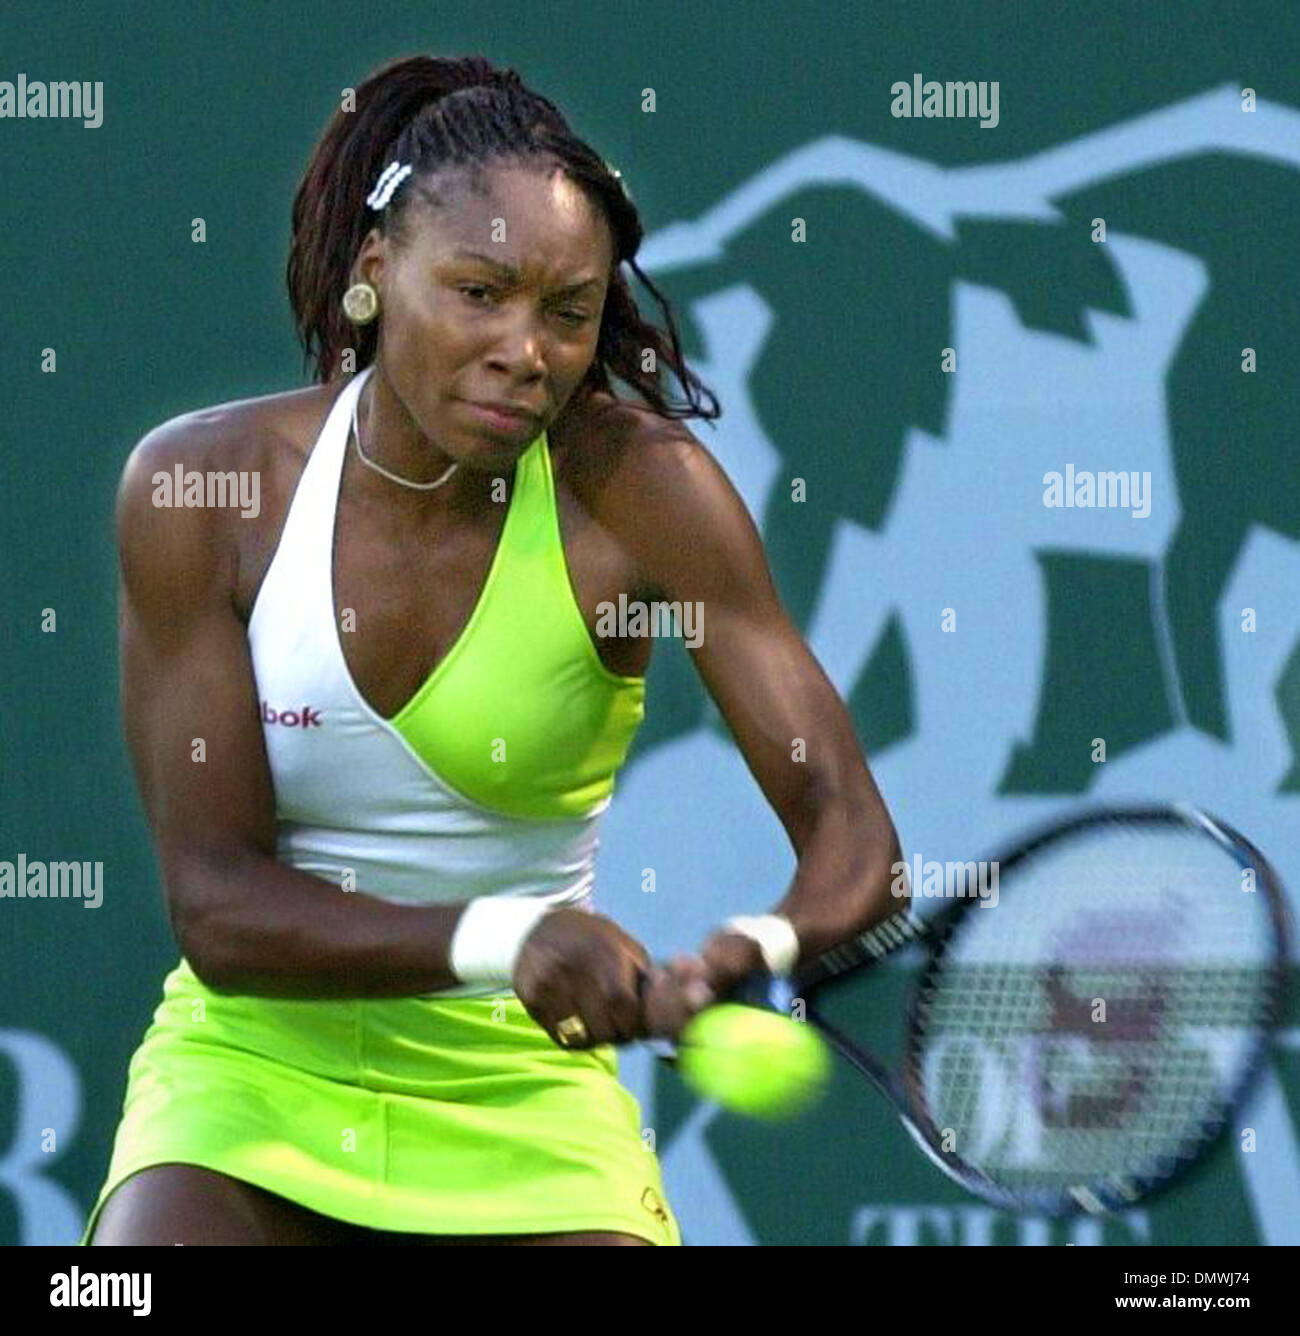 Jul 26, 2001; Palo Alto, CA, USA; Venus Williams  returns the ball during her Bank of the West Classic tennis match against Kristina Brandi  in Palo Alto Calif., on Thursday, July 26, 2001. Stock Photo